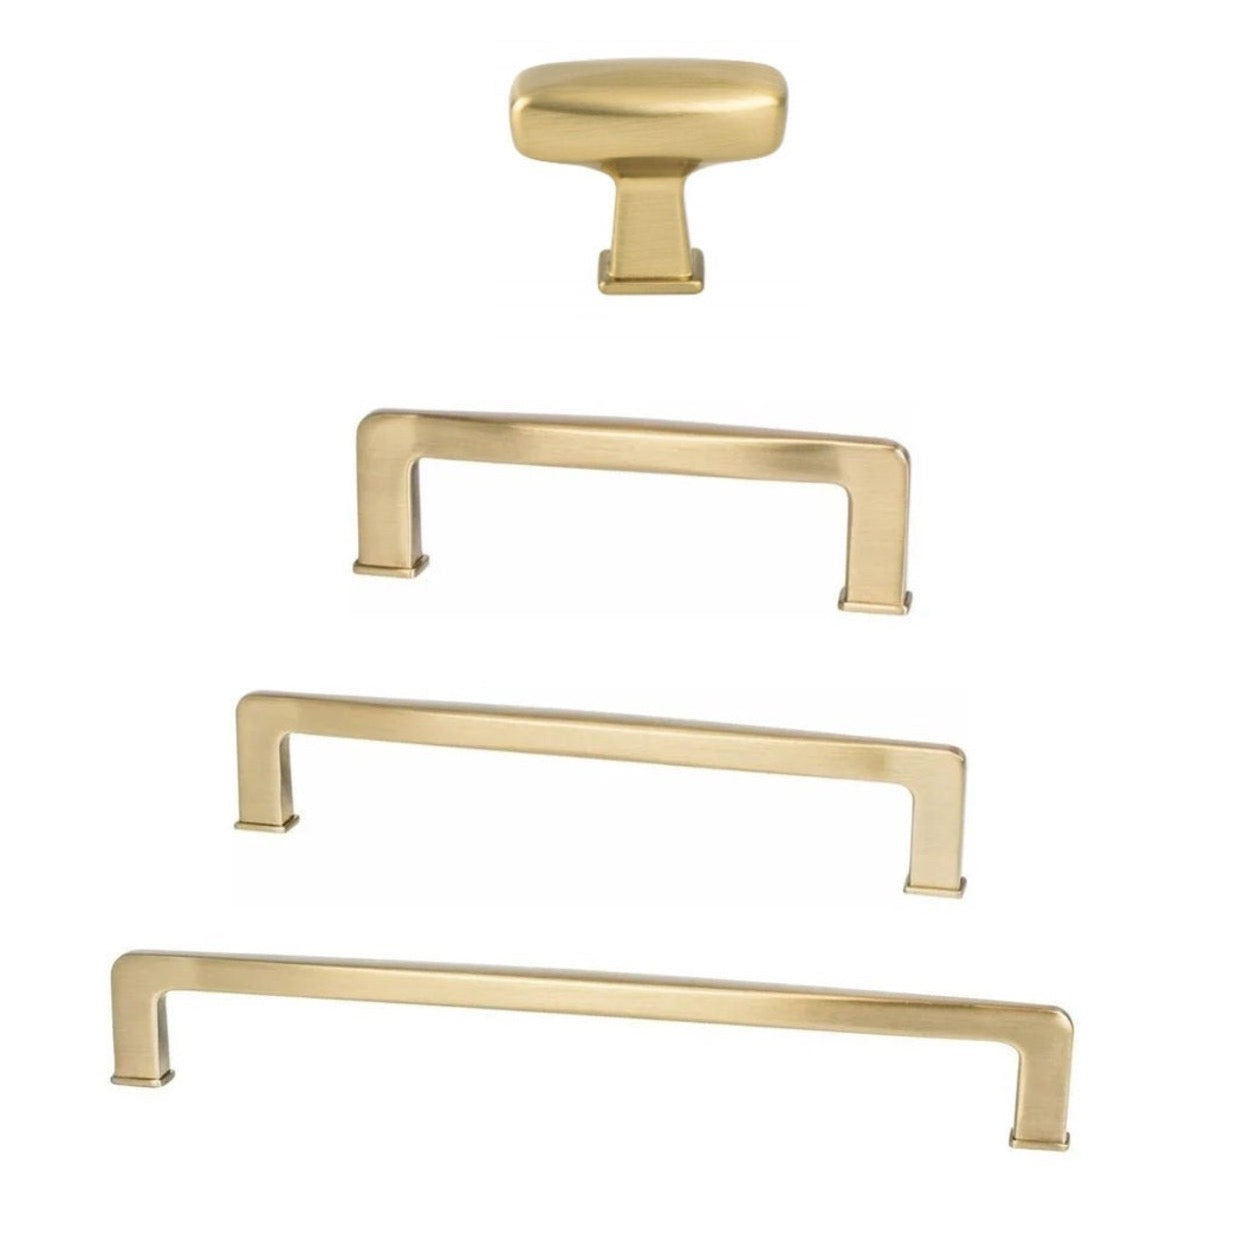 Kelly No.1 Brass Cabinet Knobs and Drawer Pulls - Forge Hardware Studio